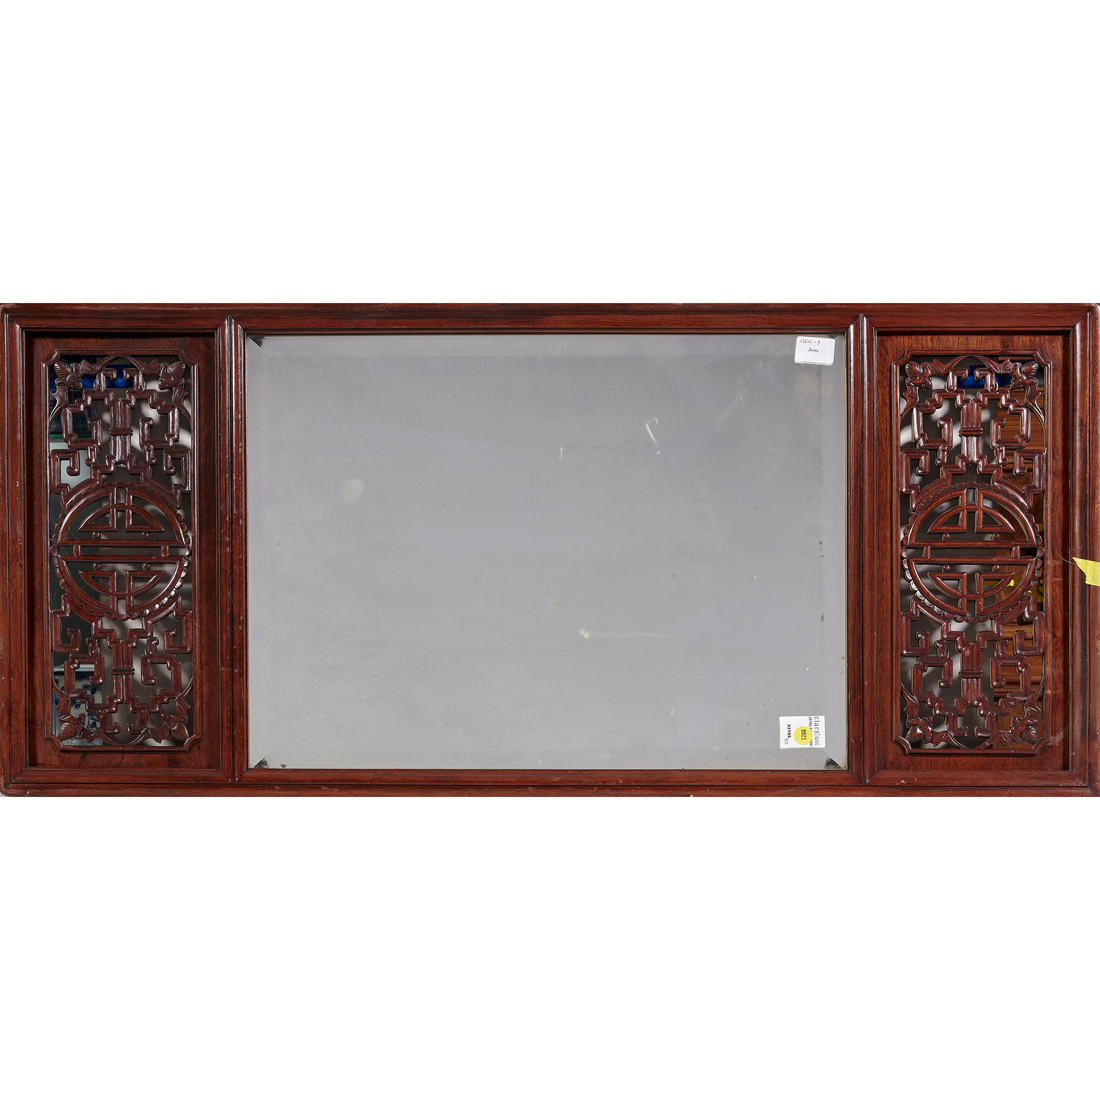 CHINESE HARDWOOD FRAMED GLASS MIRROR 3a107a